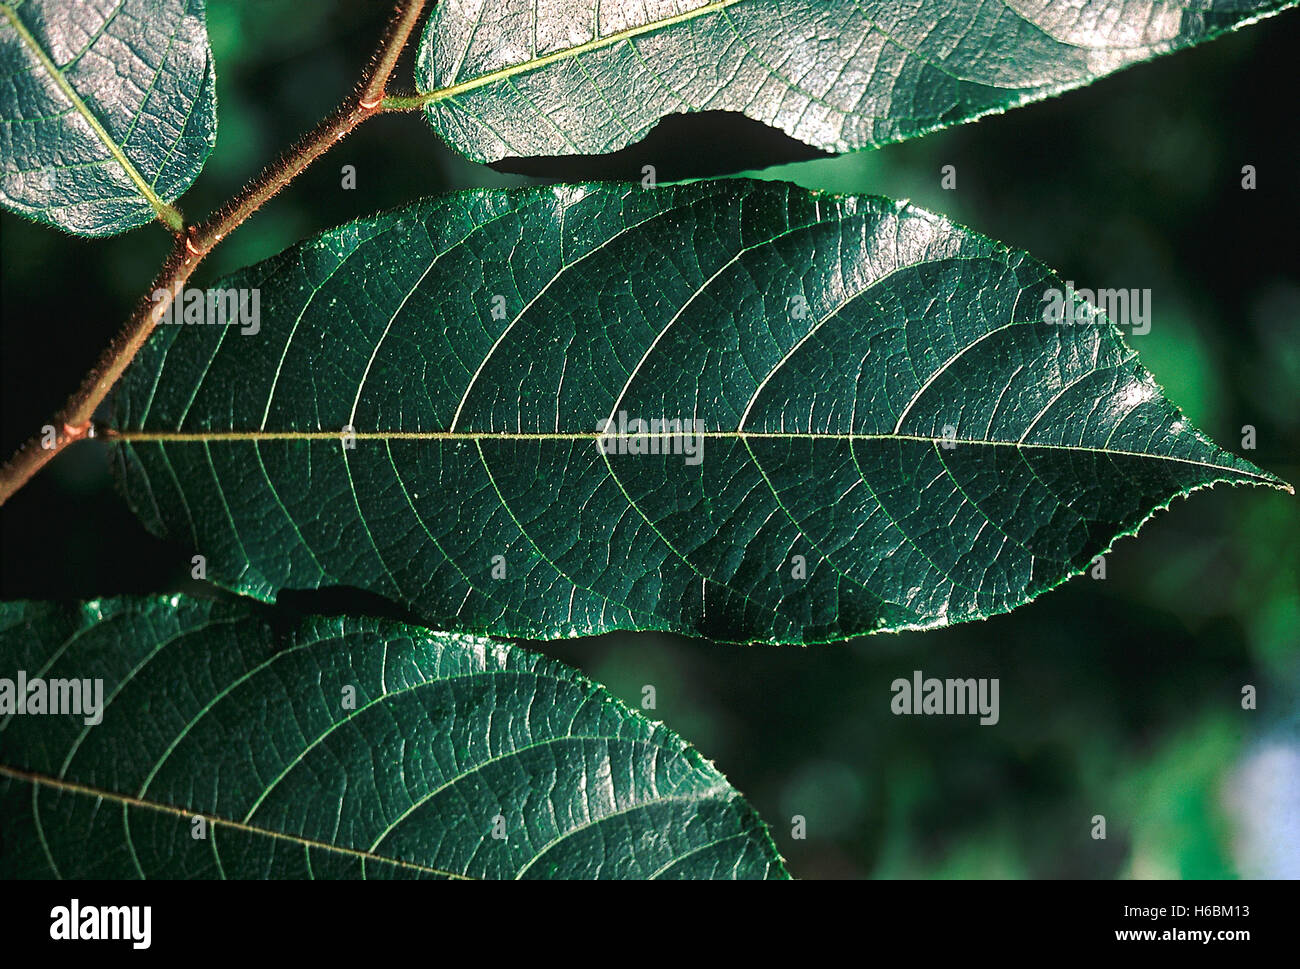 Leaves. Antiaris Toxicaria. Upas tree/ Ipoc tree. Family: Moraceae. A very large forest tree found in the evergreen forests Stock Photo